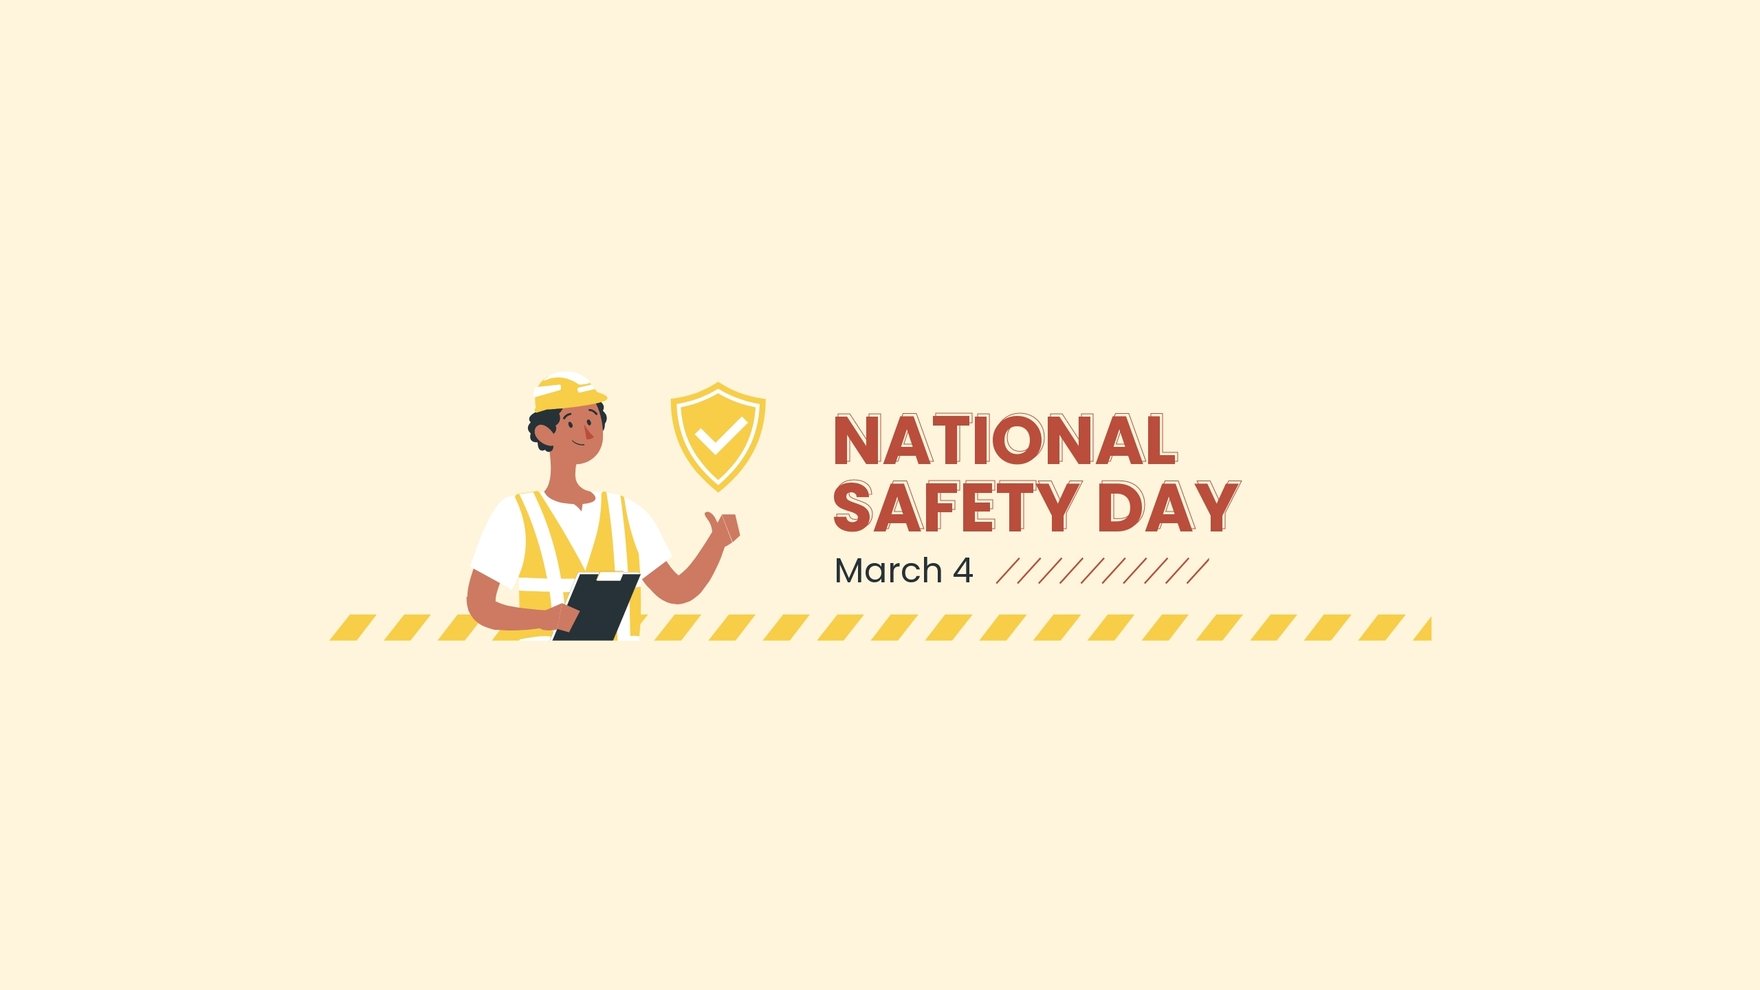 National Safety Day 